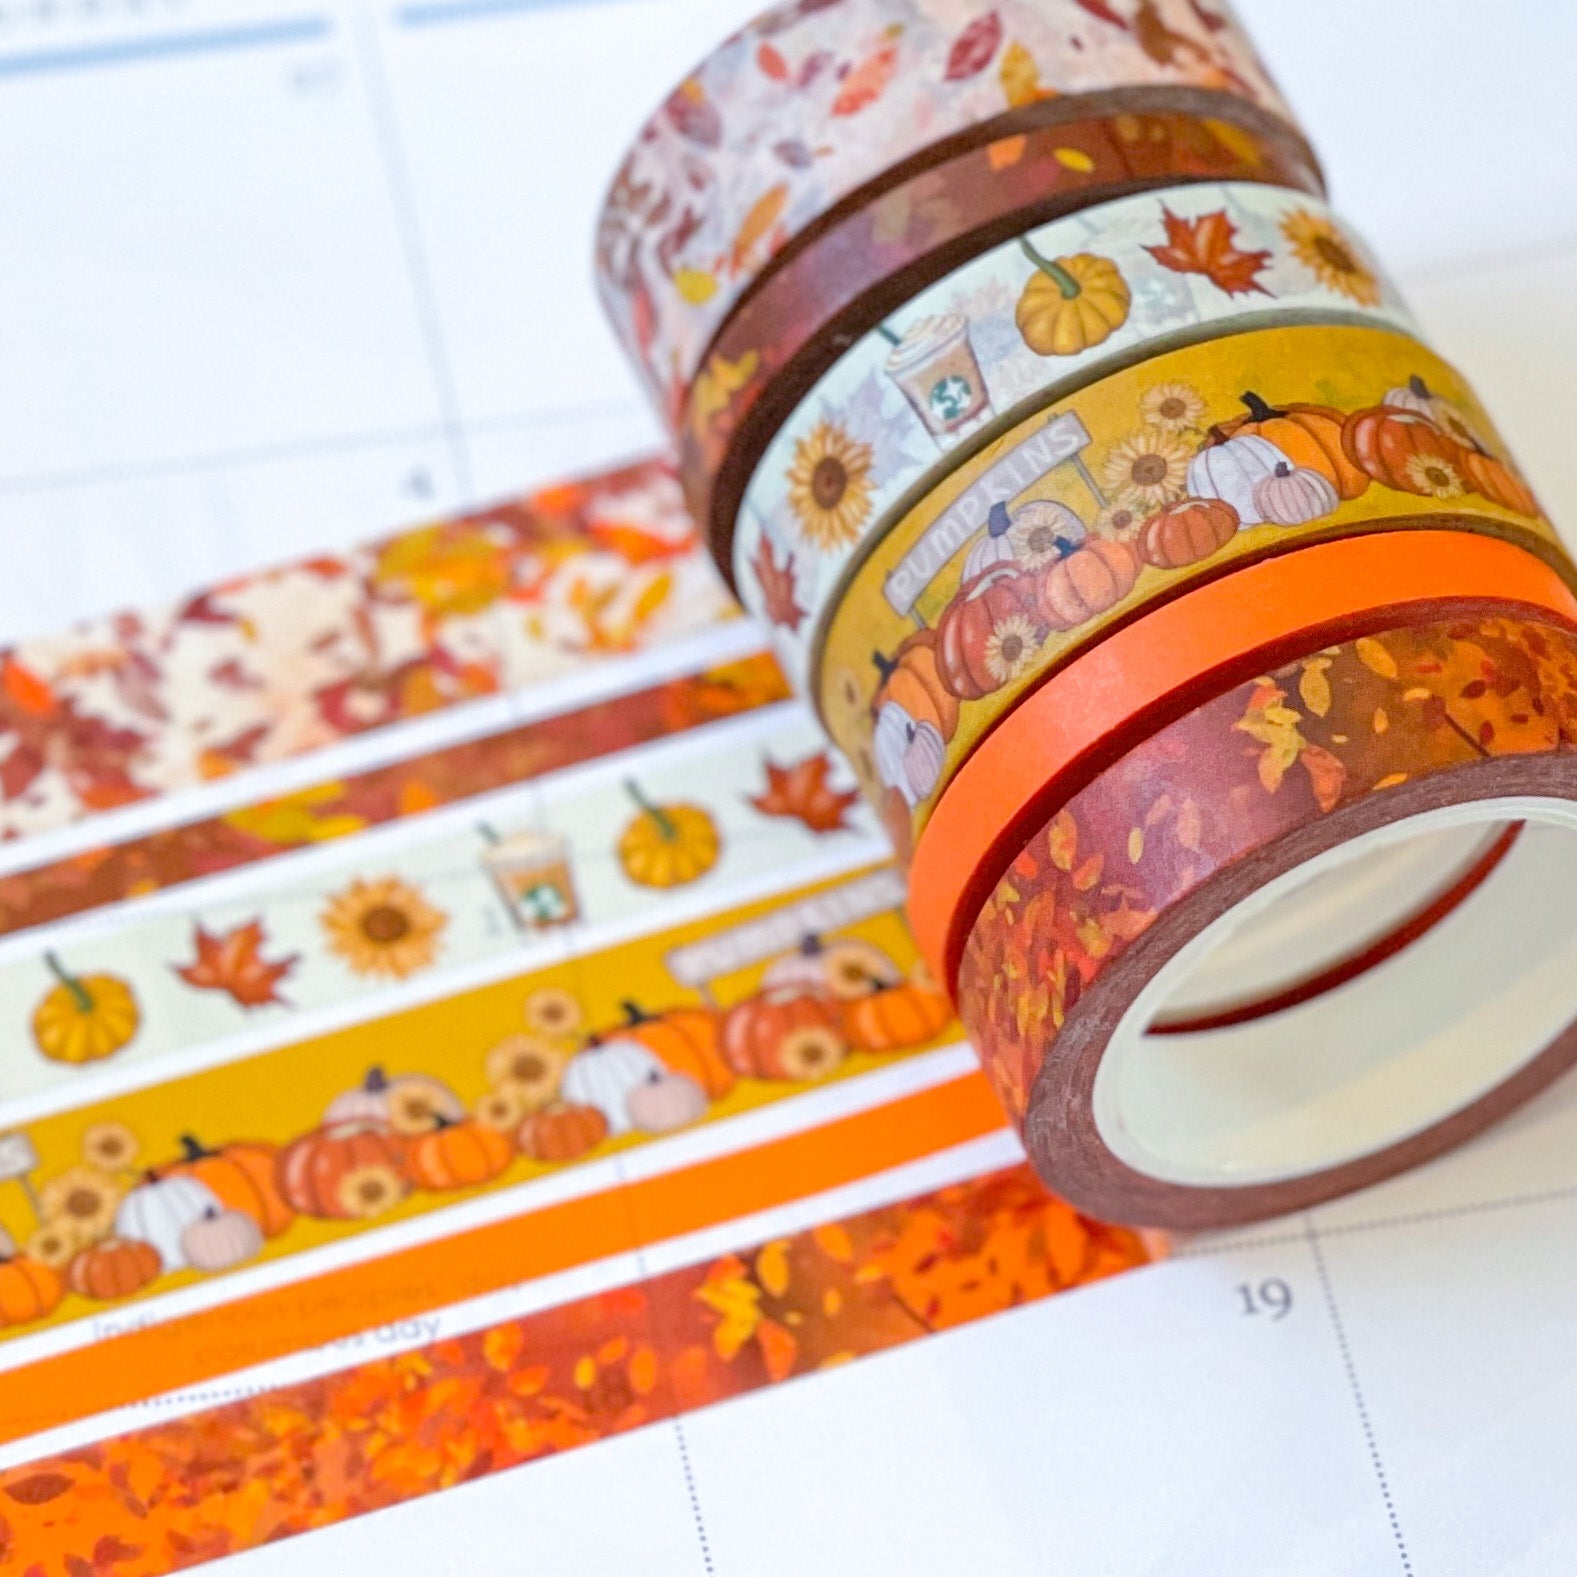 Winter Snowman Snowy Trees Forest Periwinkle Washi Tape Set (#W006